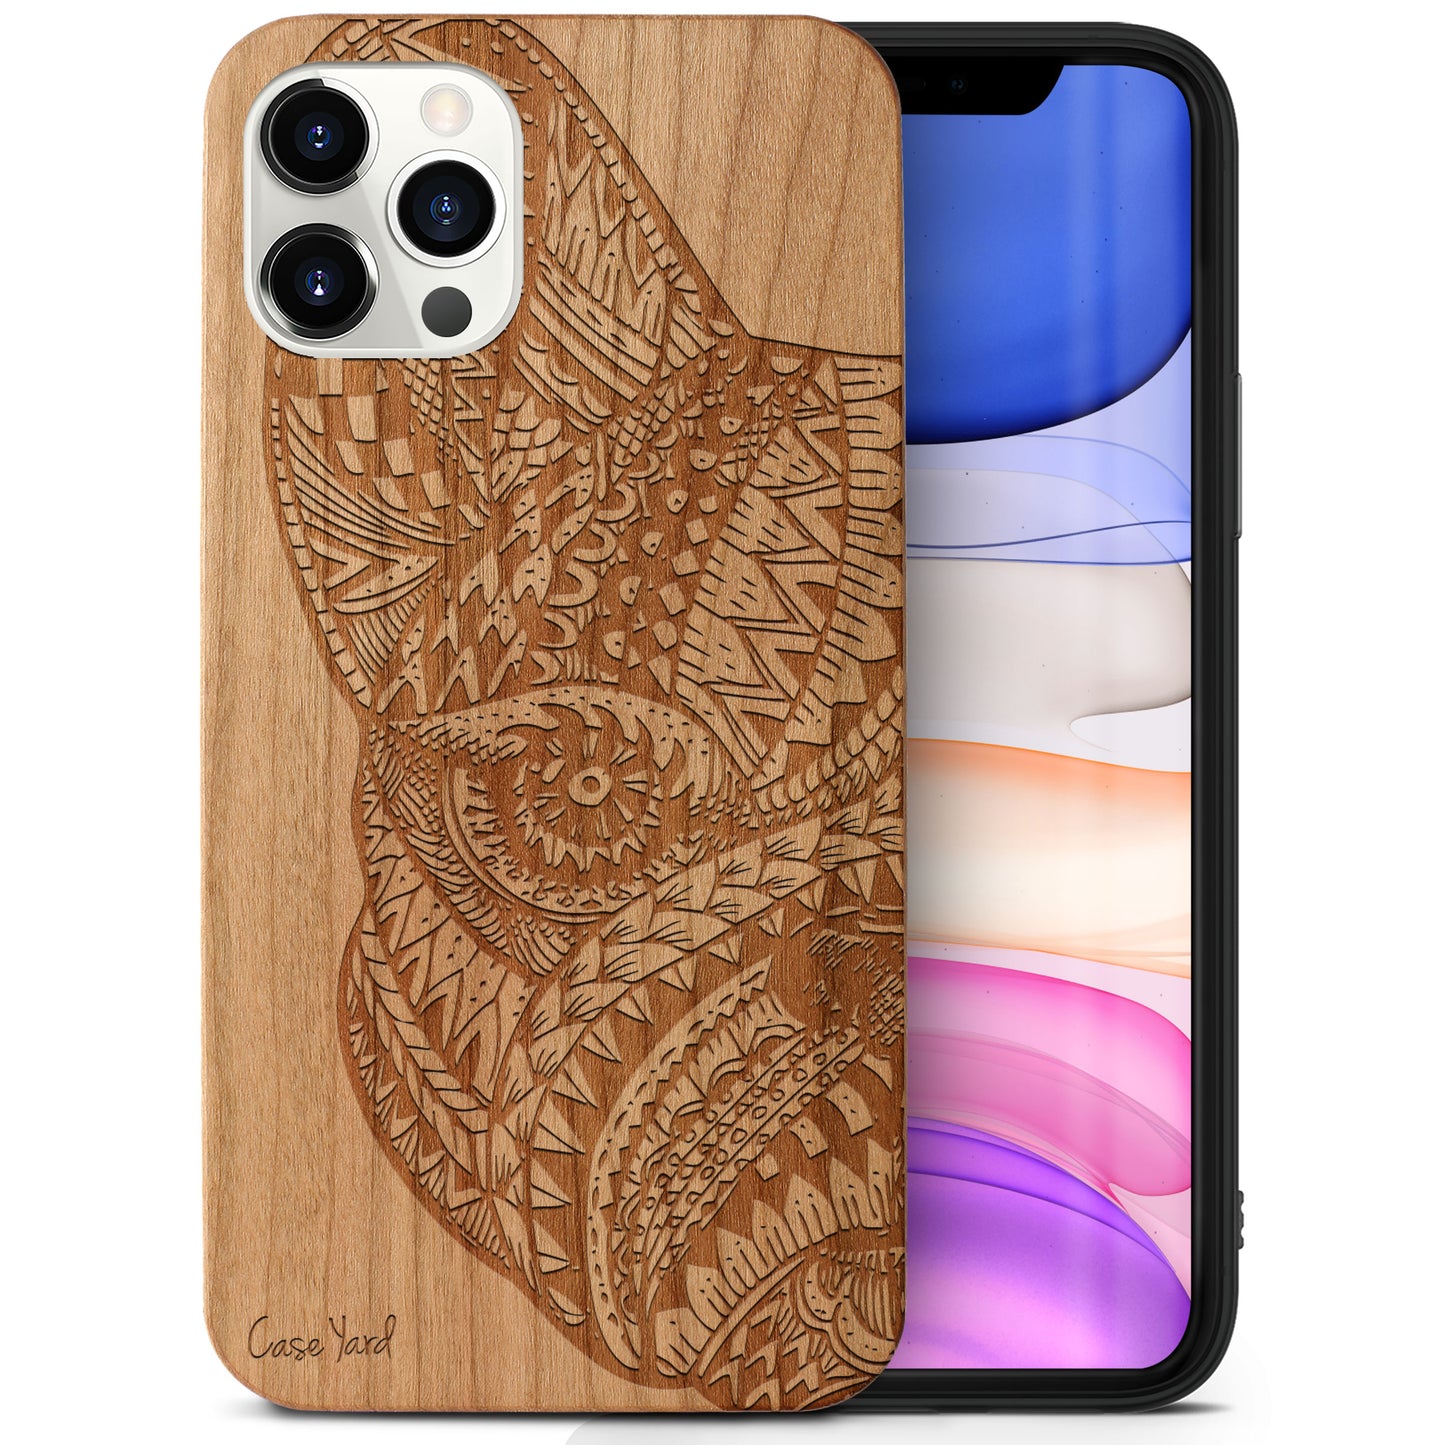 Wooden Cell Phone Case Cover, Laser Engraved case for iPhone & Samsung phone Pug Face Design